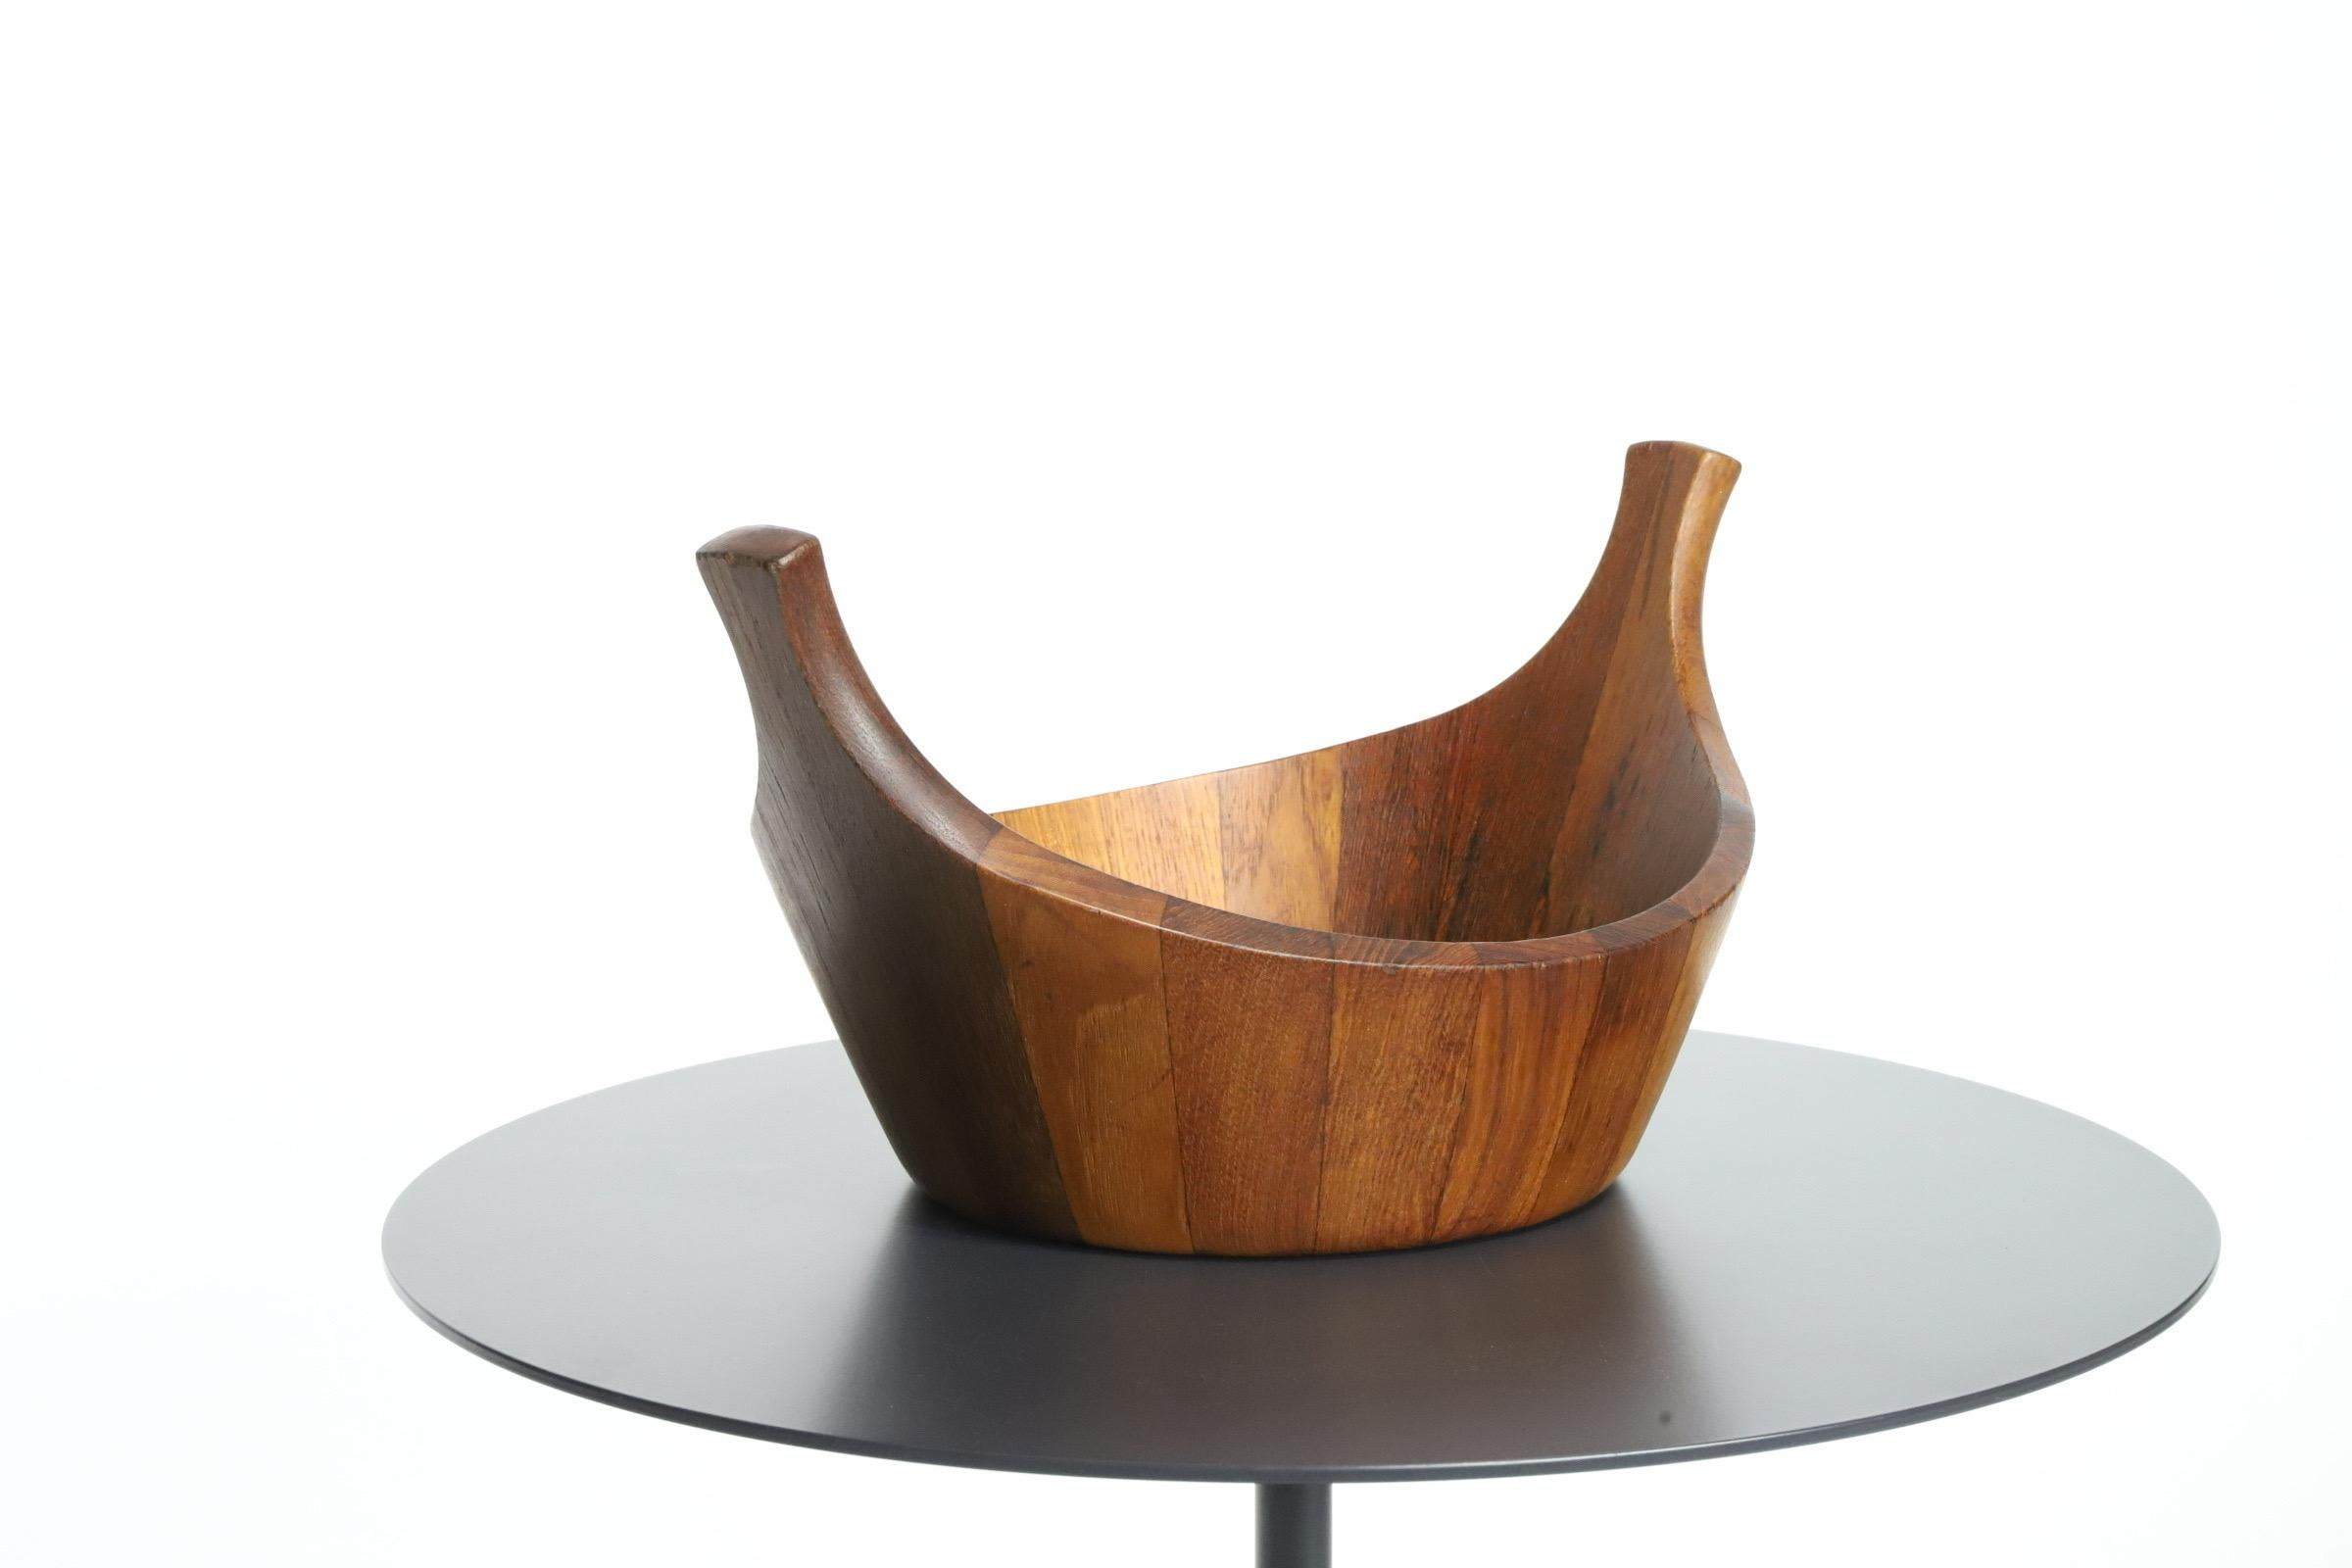  Introducing a timeless classic - the Dansk Teak Staved Viking Salad Bowl, designed by the legendary Jens Quistgaard.

Crafted with utmost craftsmanship and attention to detail, this iconic salad bowl exemplifies the epitome of mid-century modern